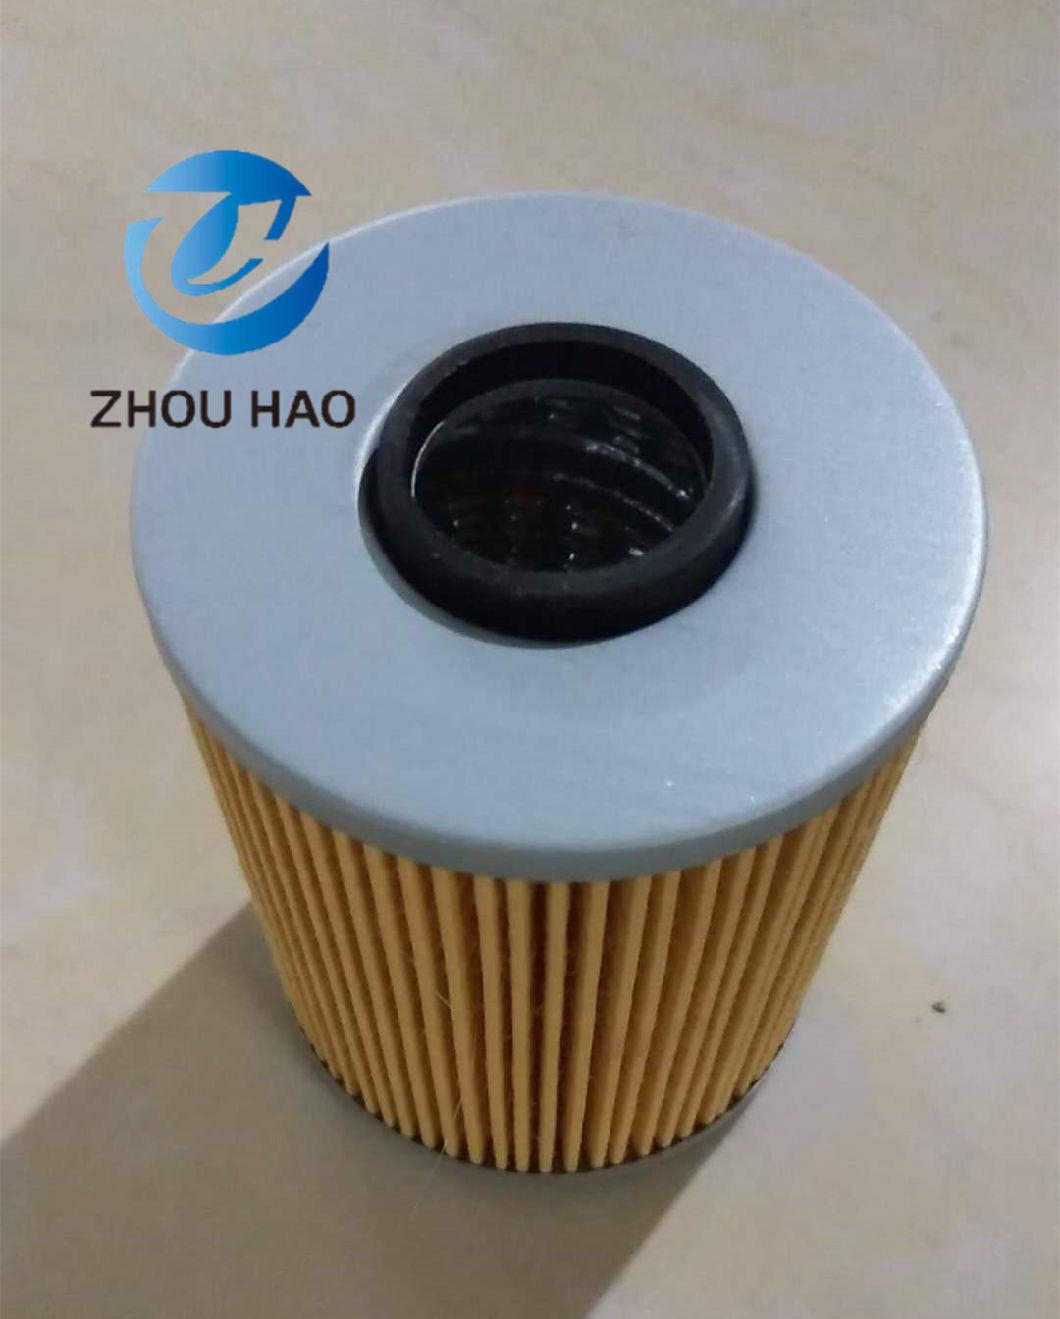 Use for BMW Preferential Price 11421711568 / Hu926/3 X / 11421730389 China Factory Auto Parts for Oil Filter